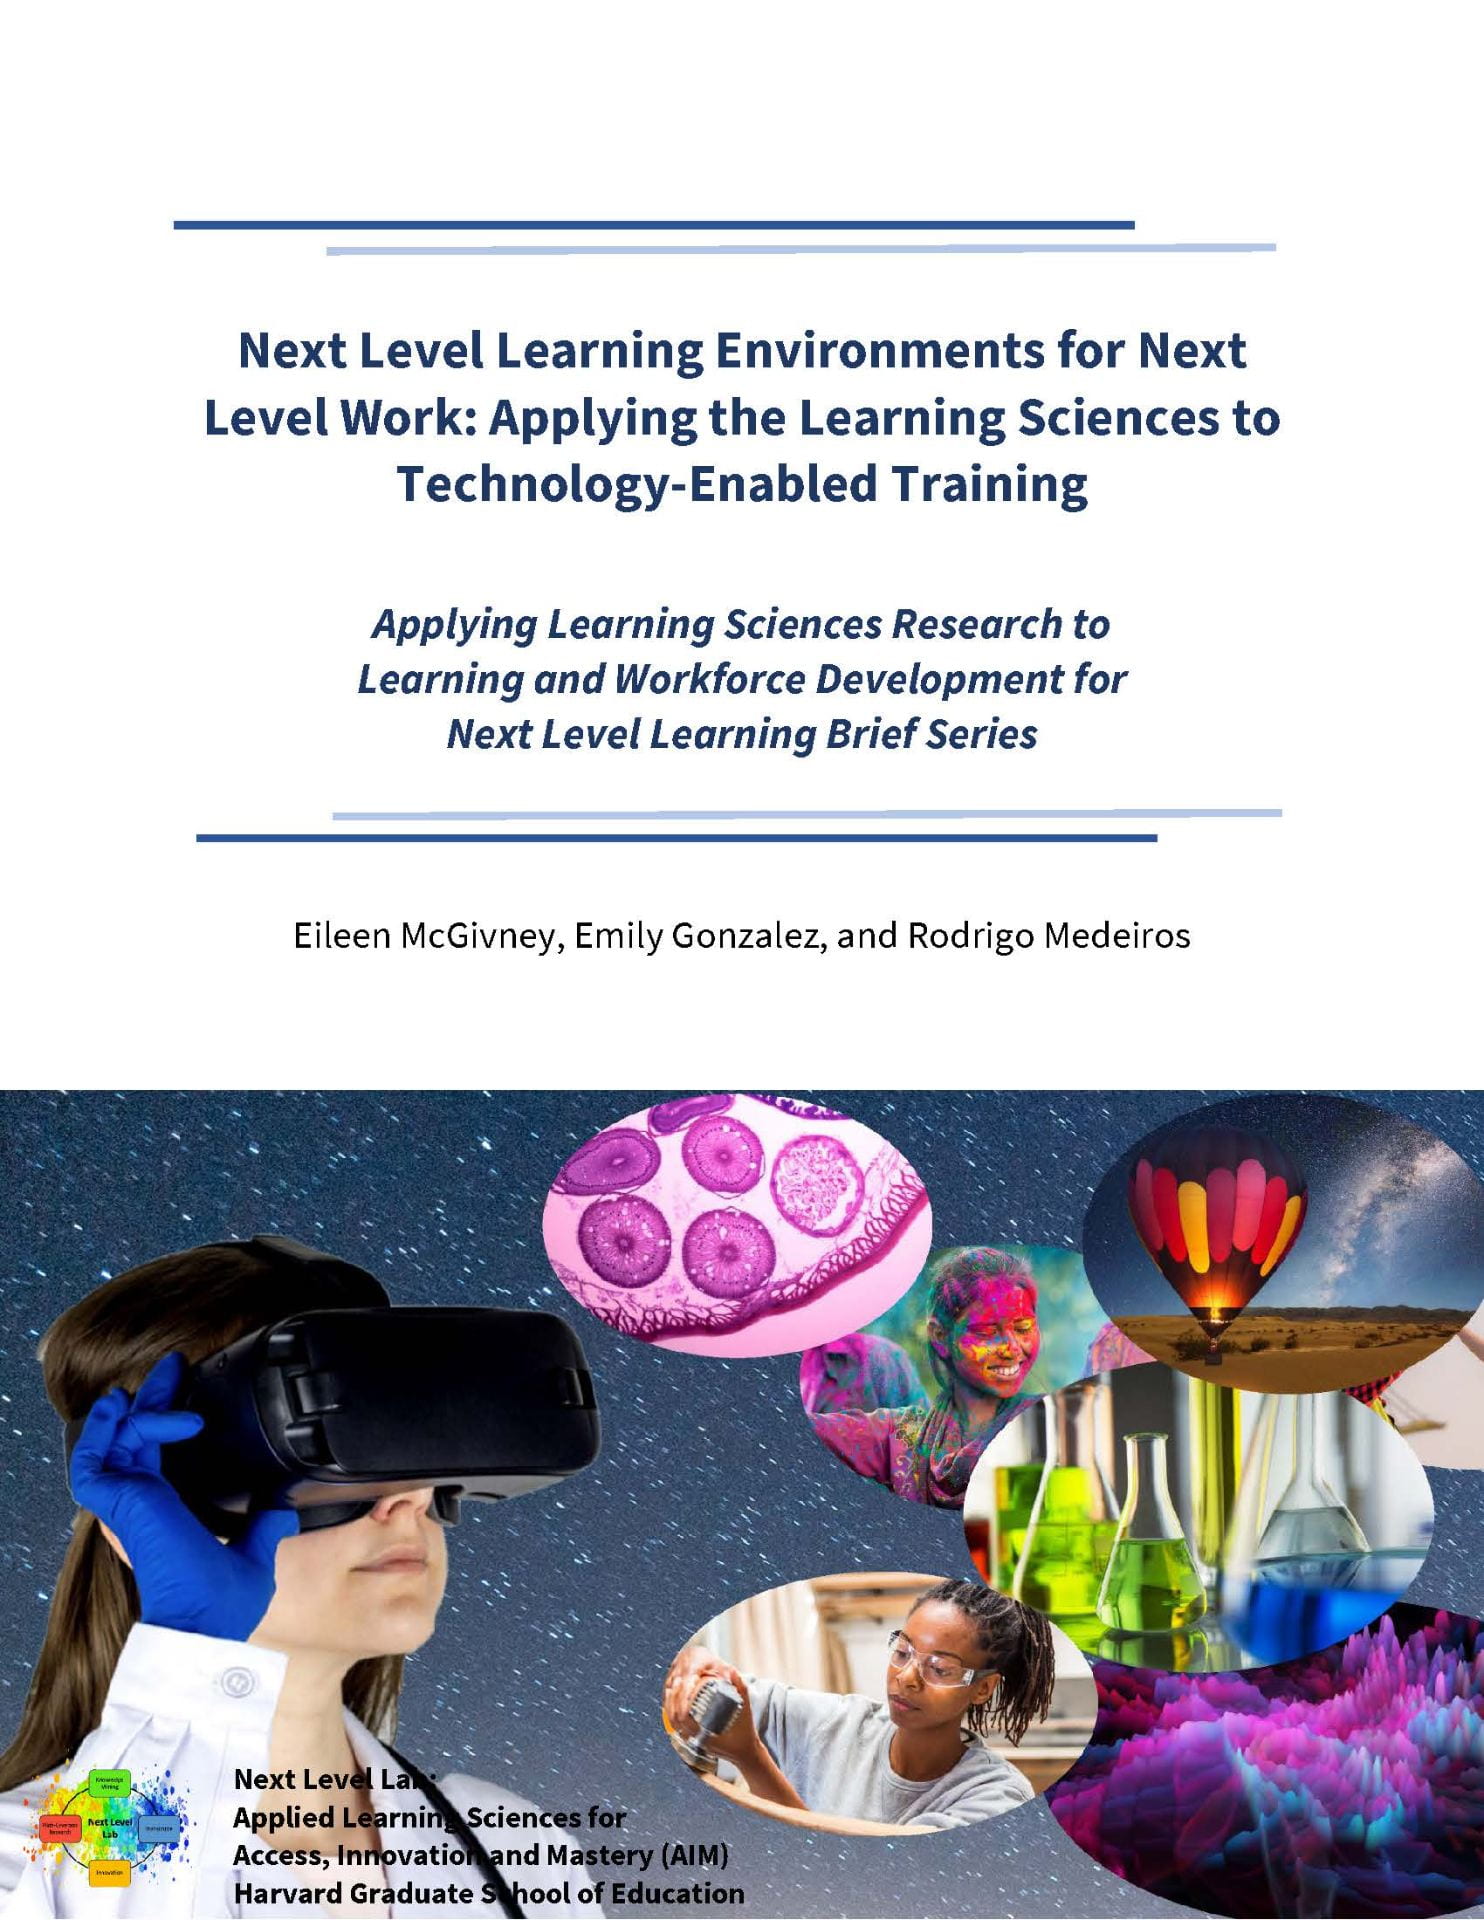 Applying the Learning Sciences to Technology-Enabled Training